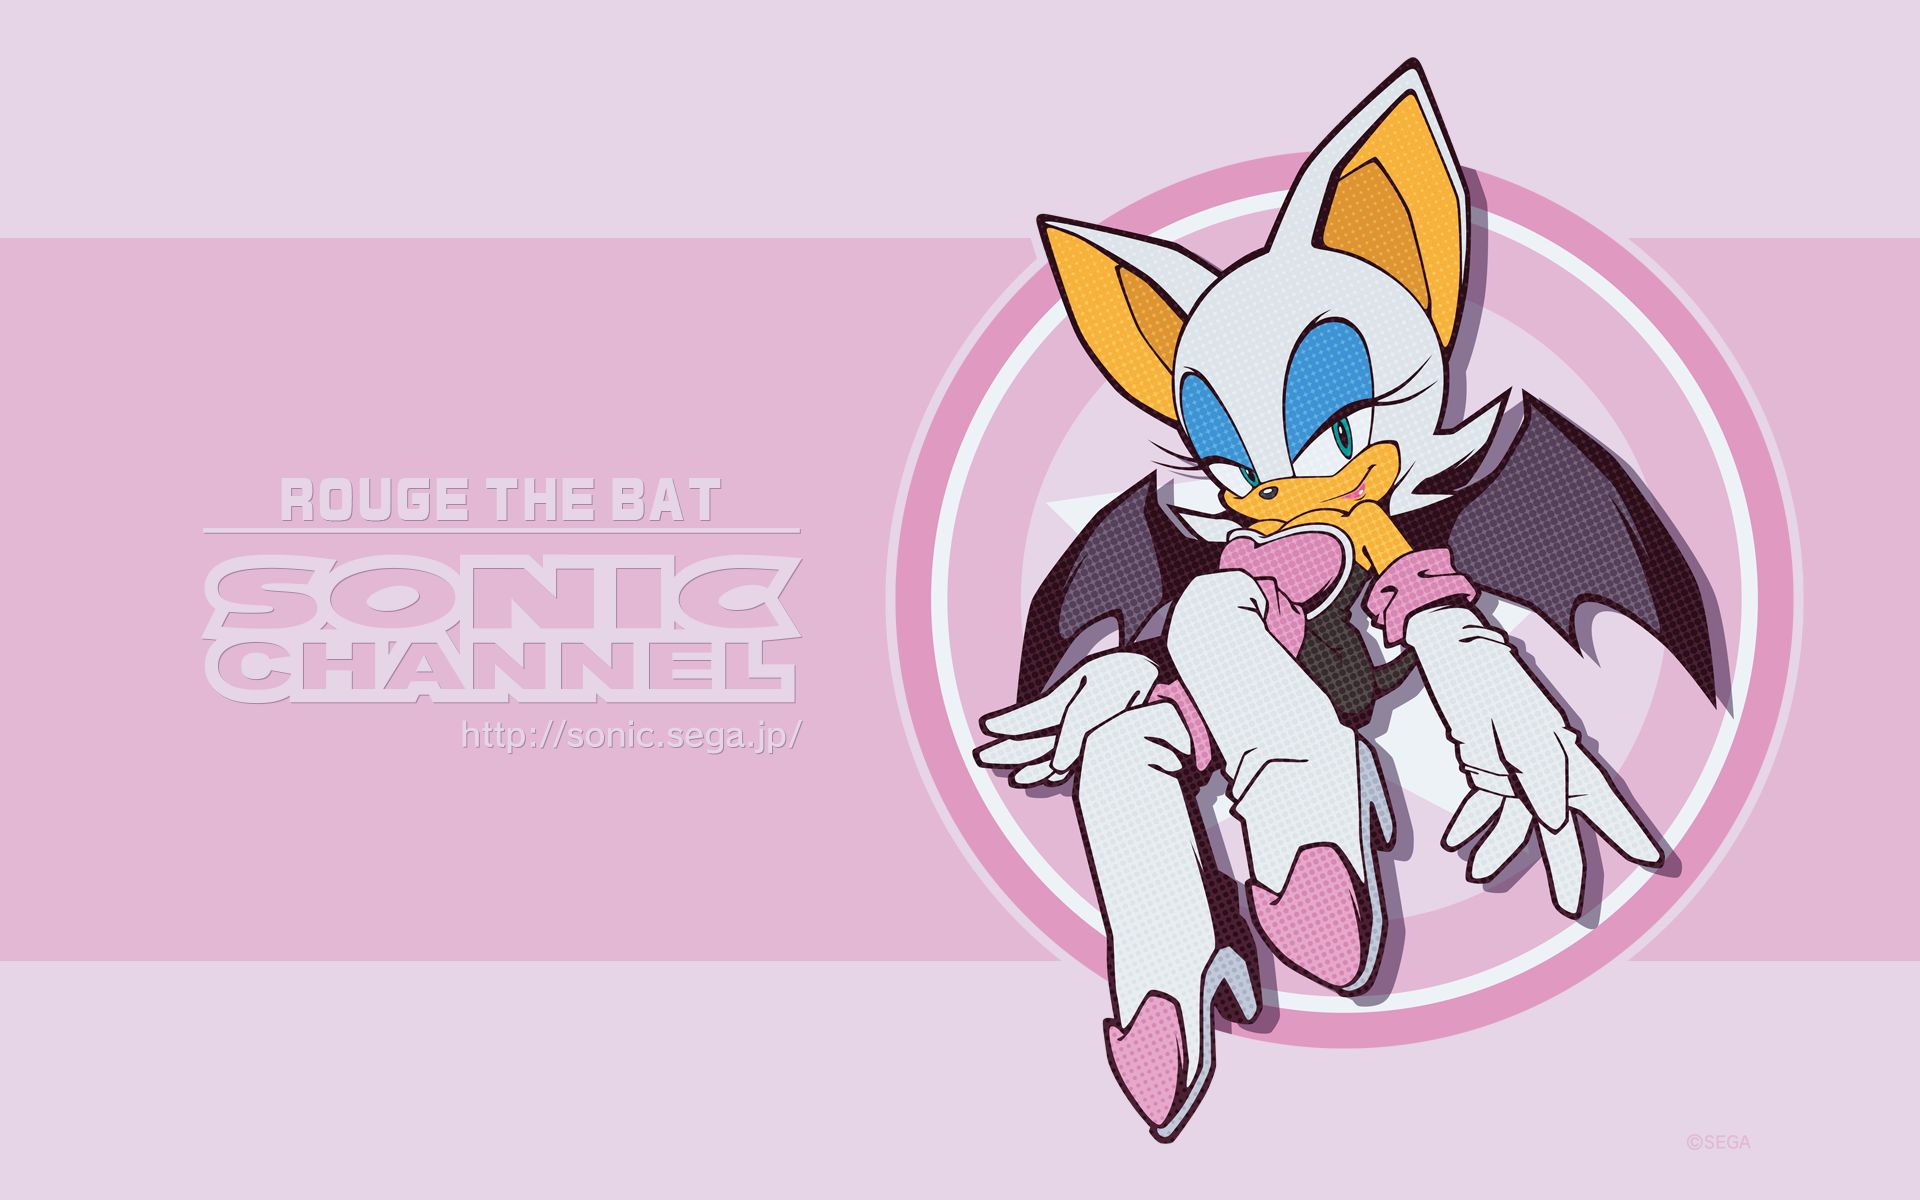 rouge the bat, video game, sonic the hedgehog, sonic channel, wings, sonic